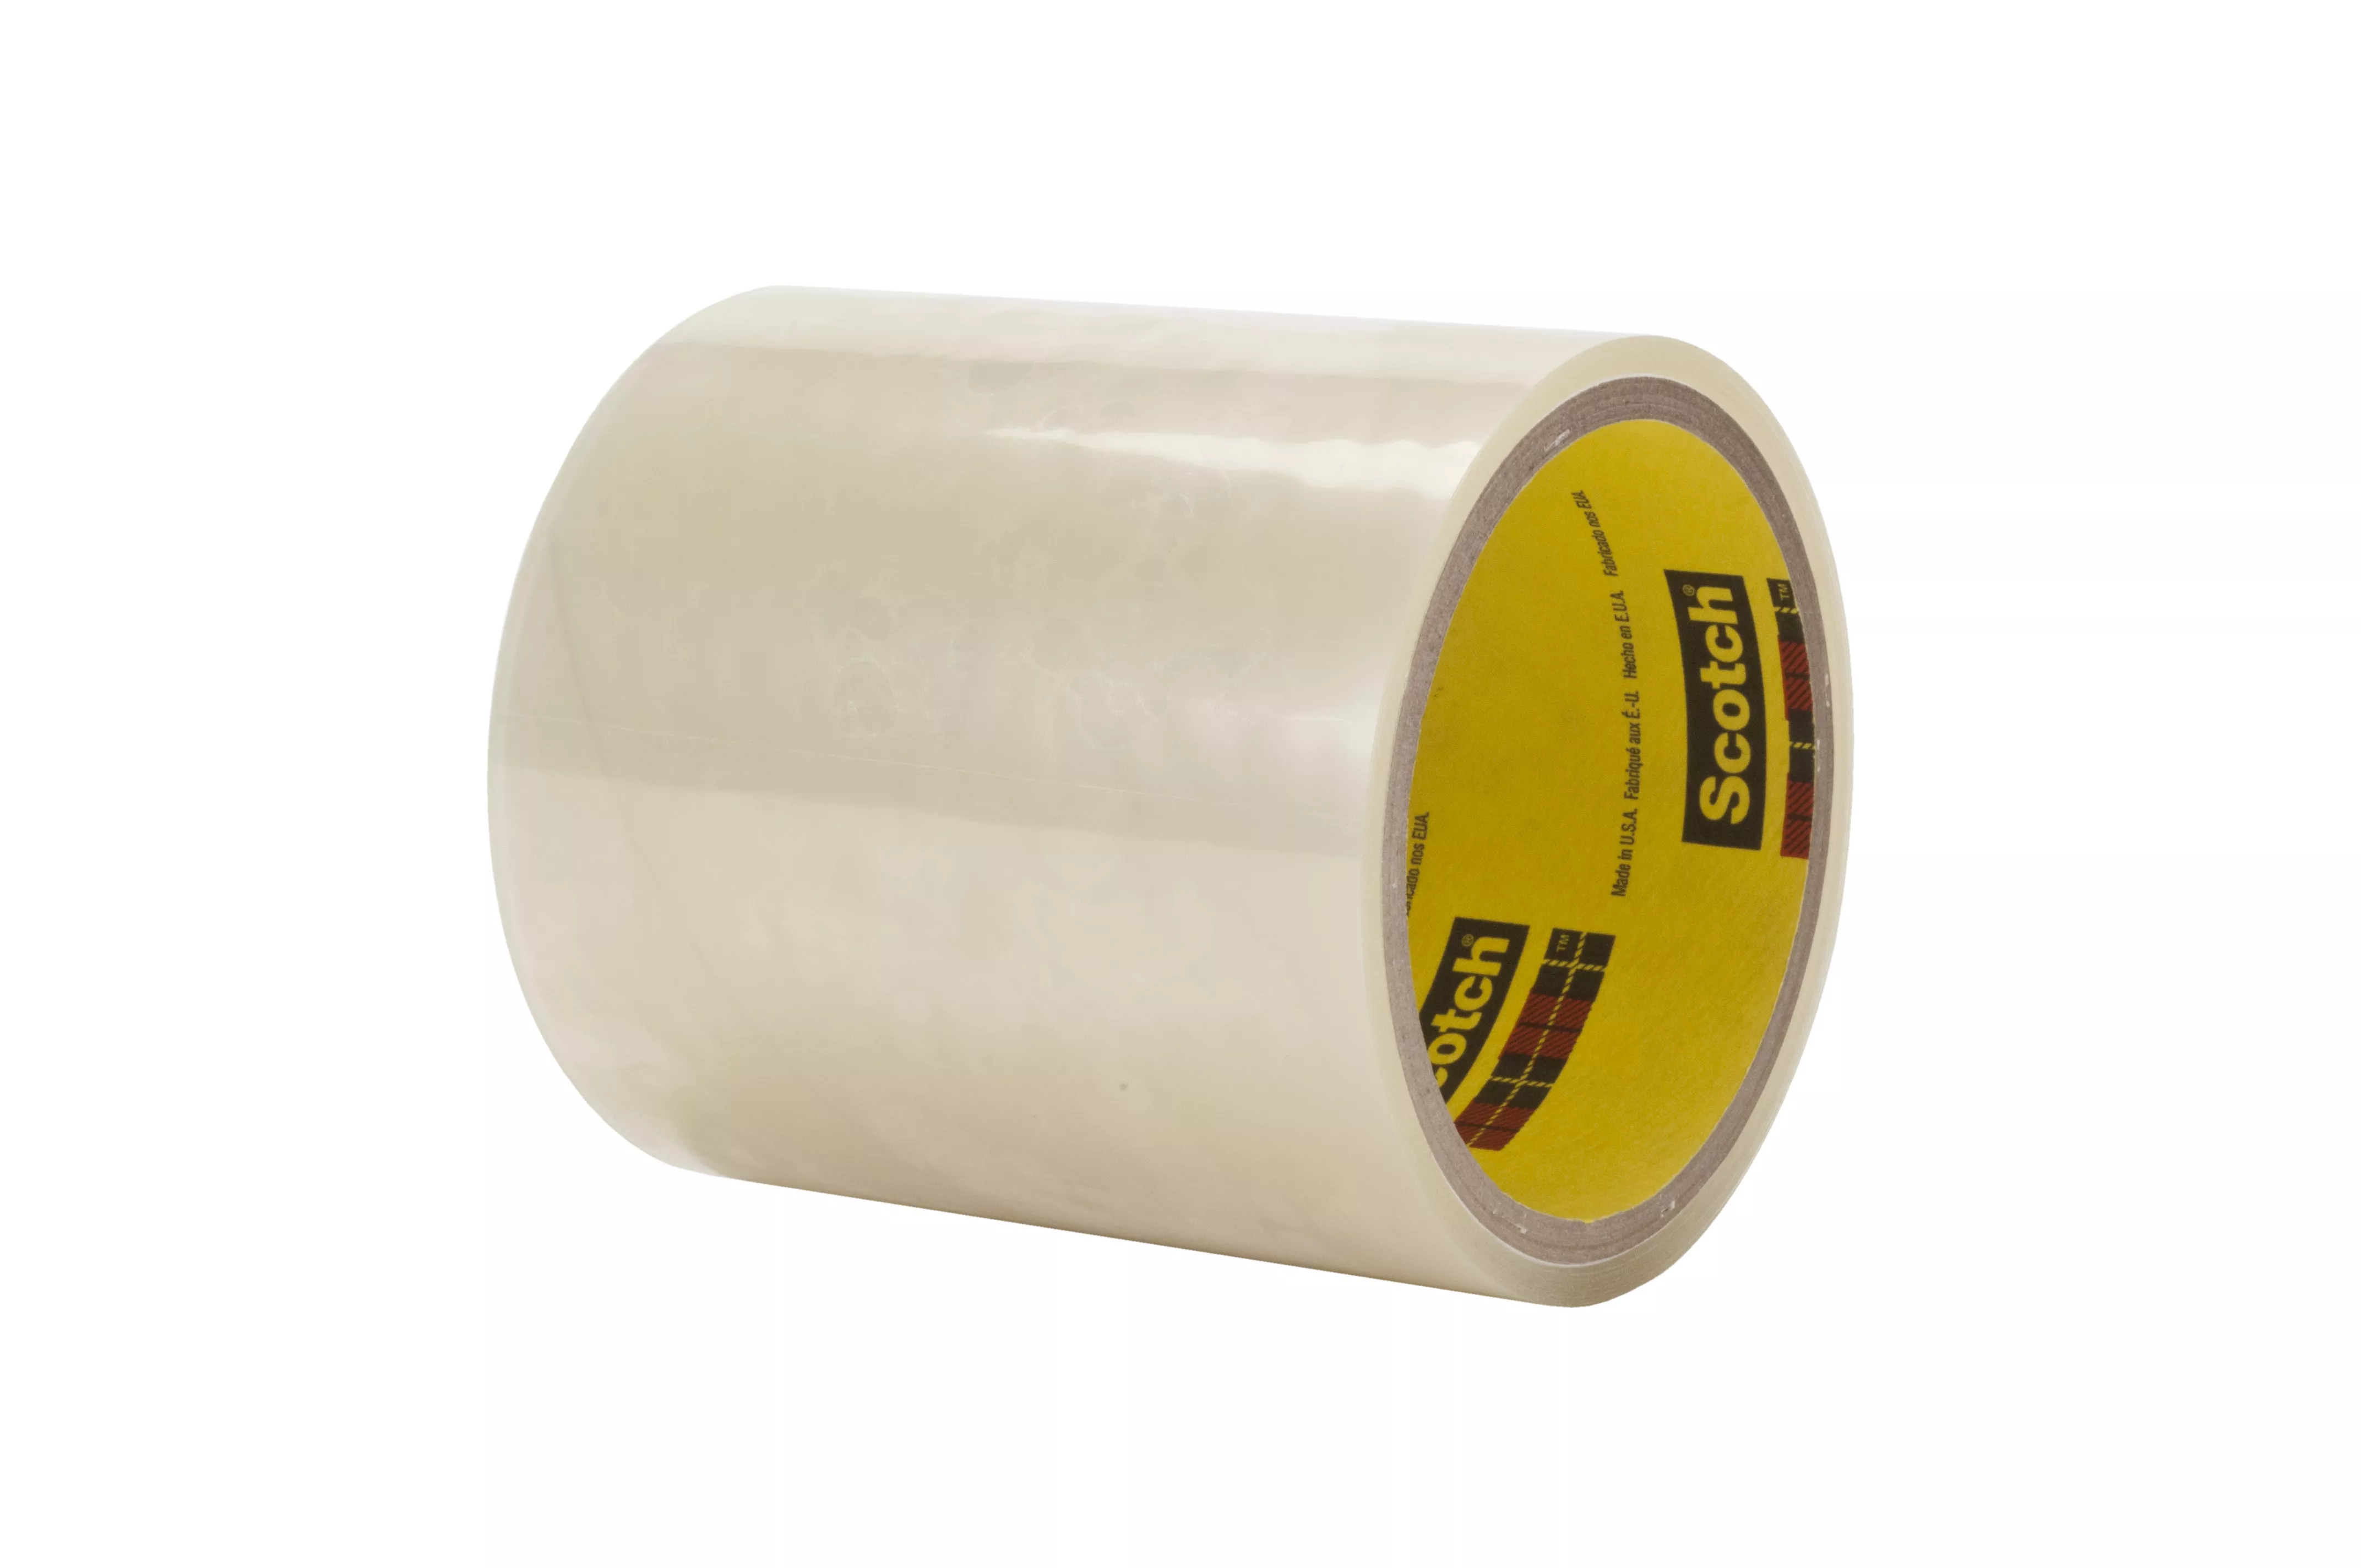 3M™ Adhesive Transfer Tape 467MP, Clear, 18 in x 180 yd, 2 mil, 1 roll
per case